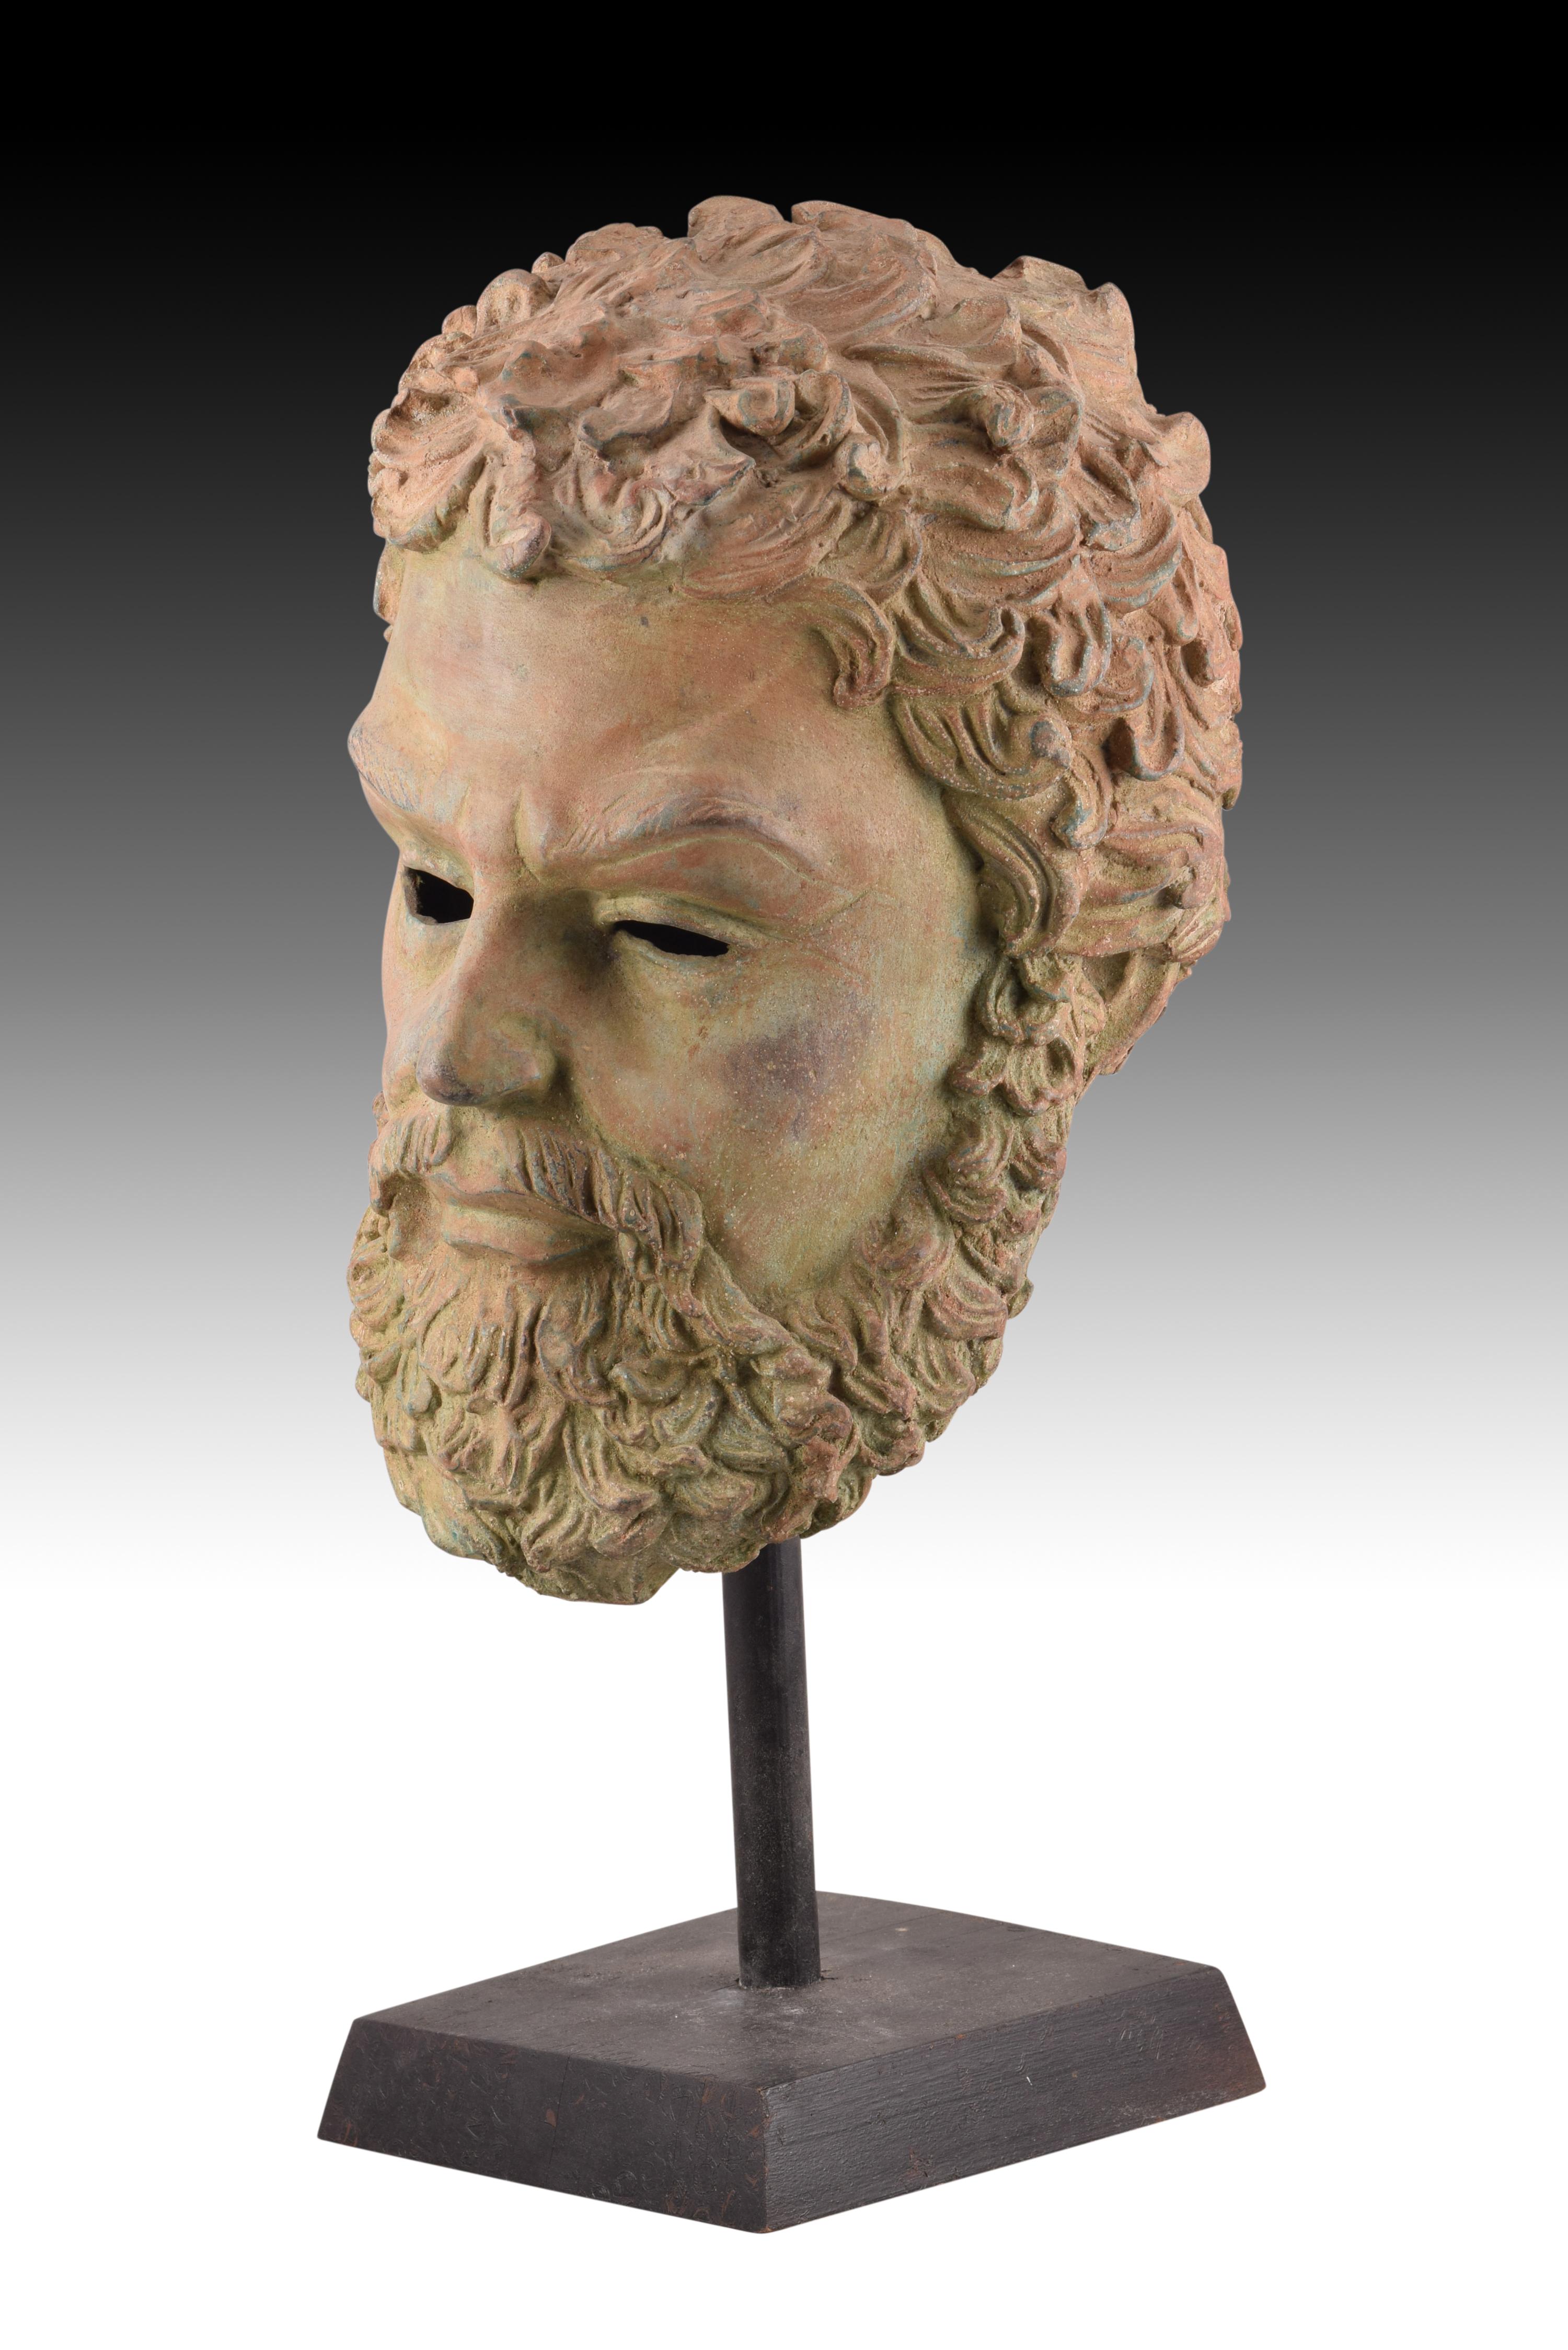 Male head on metal support made in bronze with touches of polychrome or different material work that shows a work of hair, beard and mustache with remarkable pictorialism. The quality of the piece is also appreciated in its realism, although it is